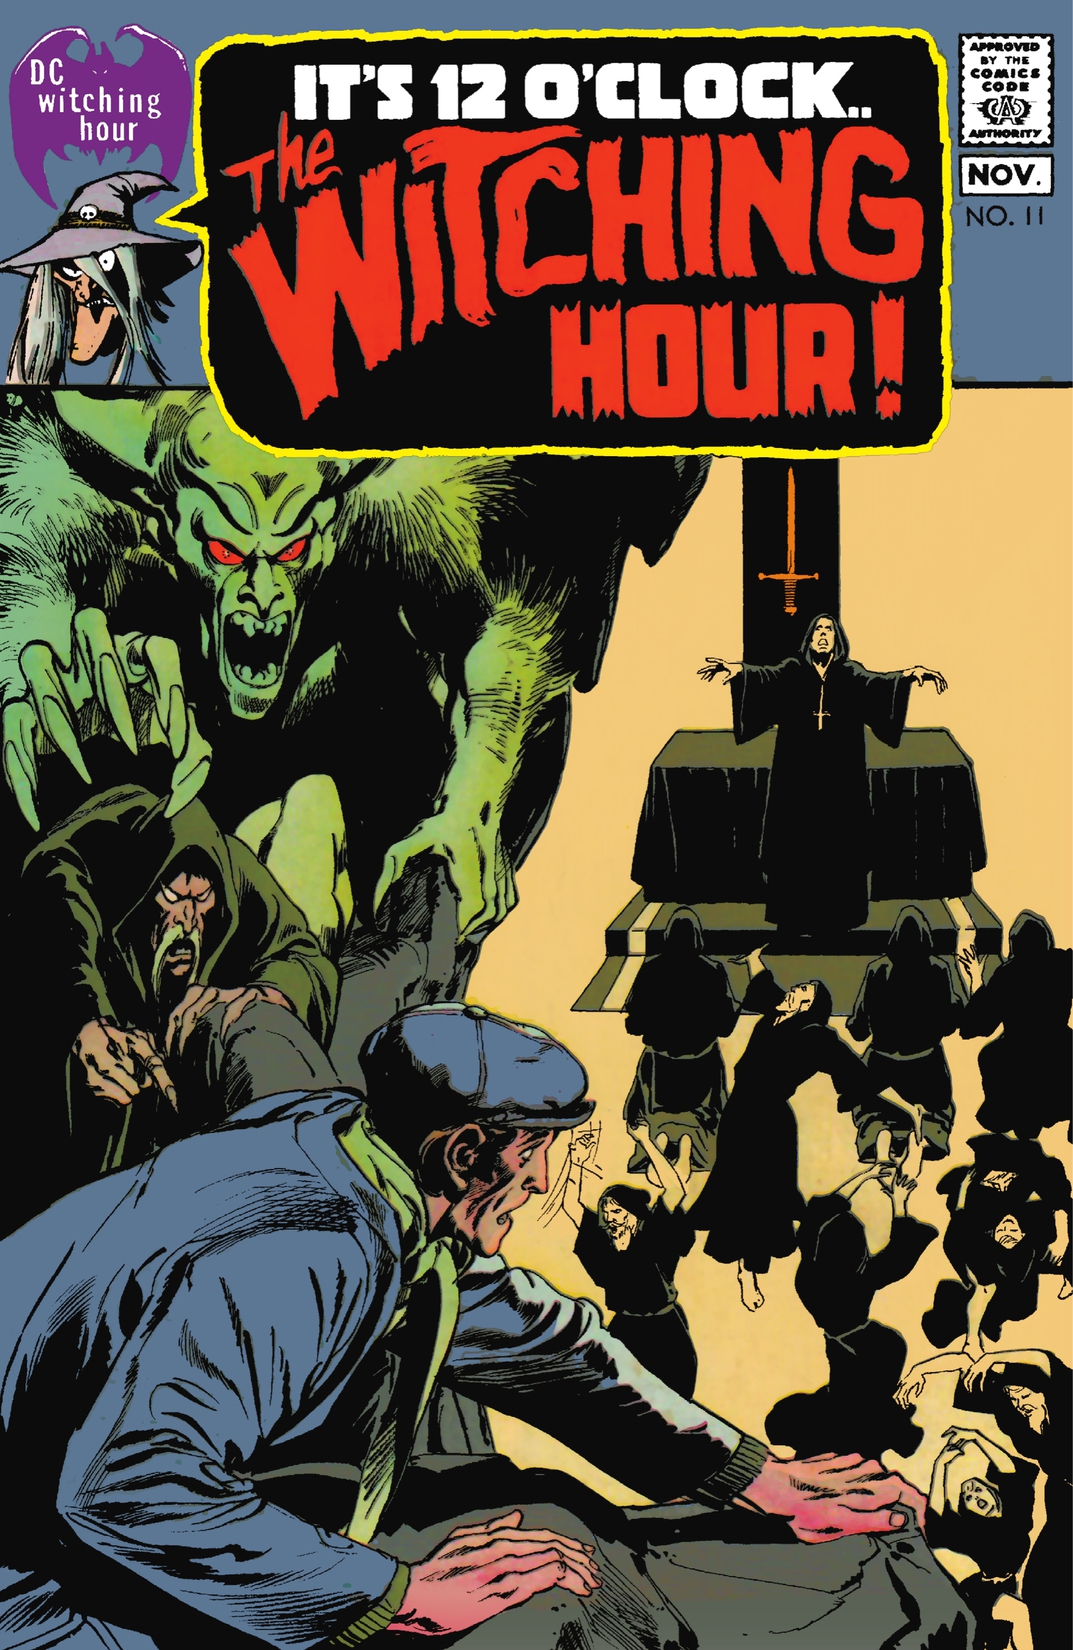 The Witching Hour #11 preview images